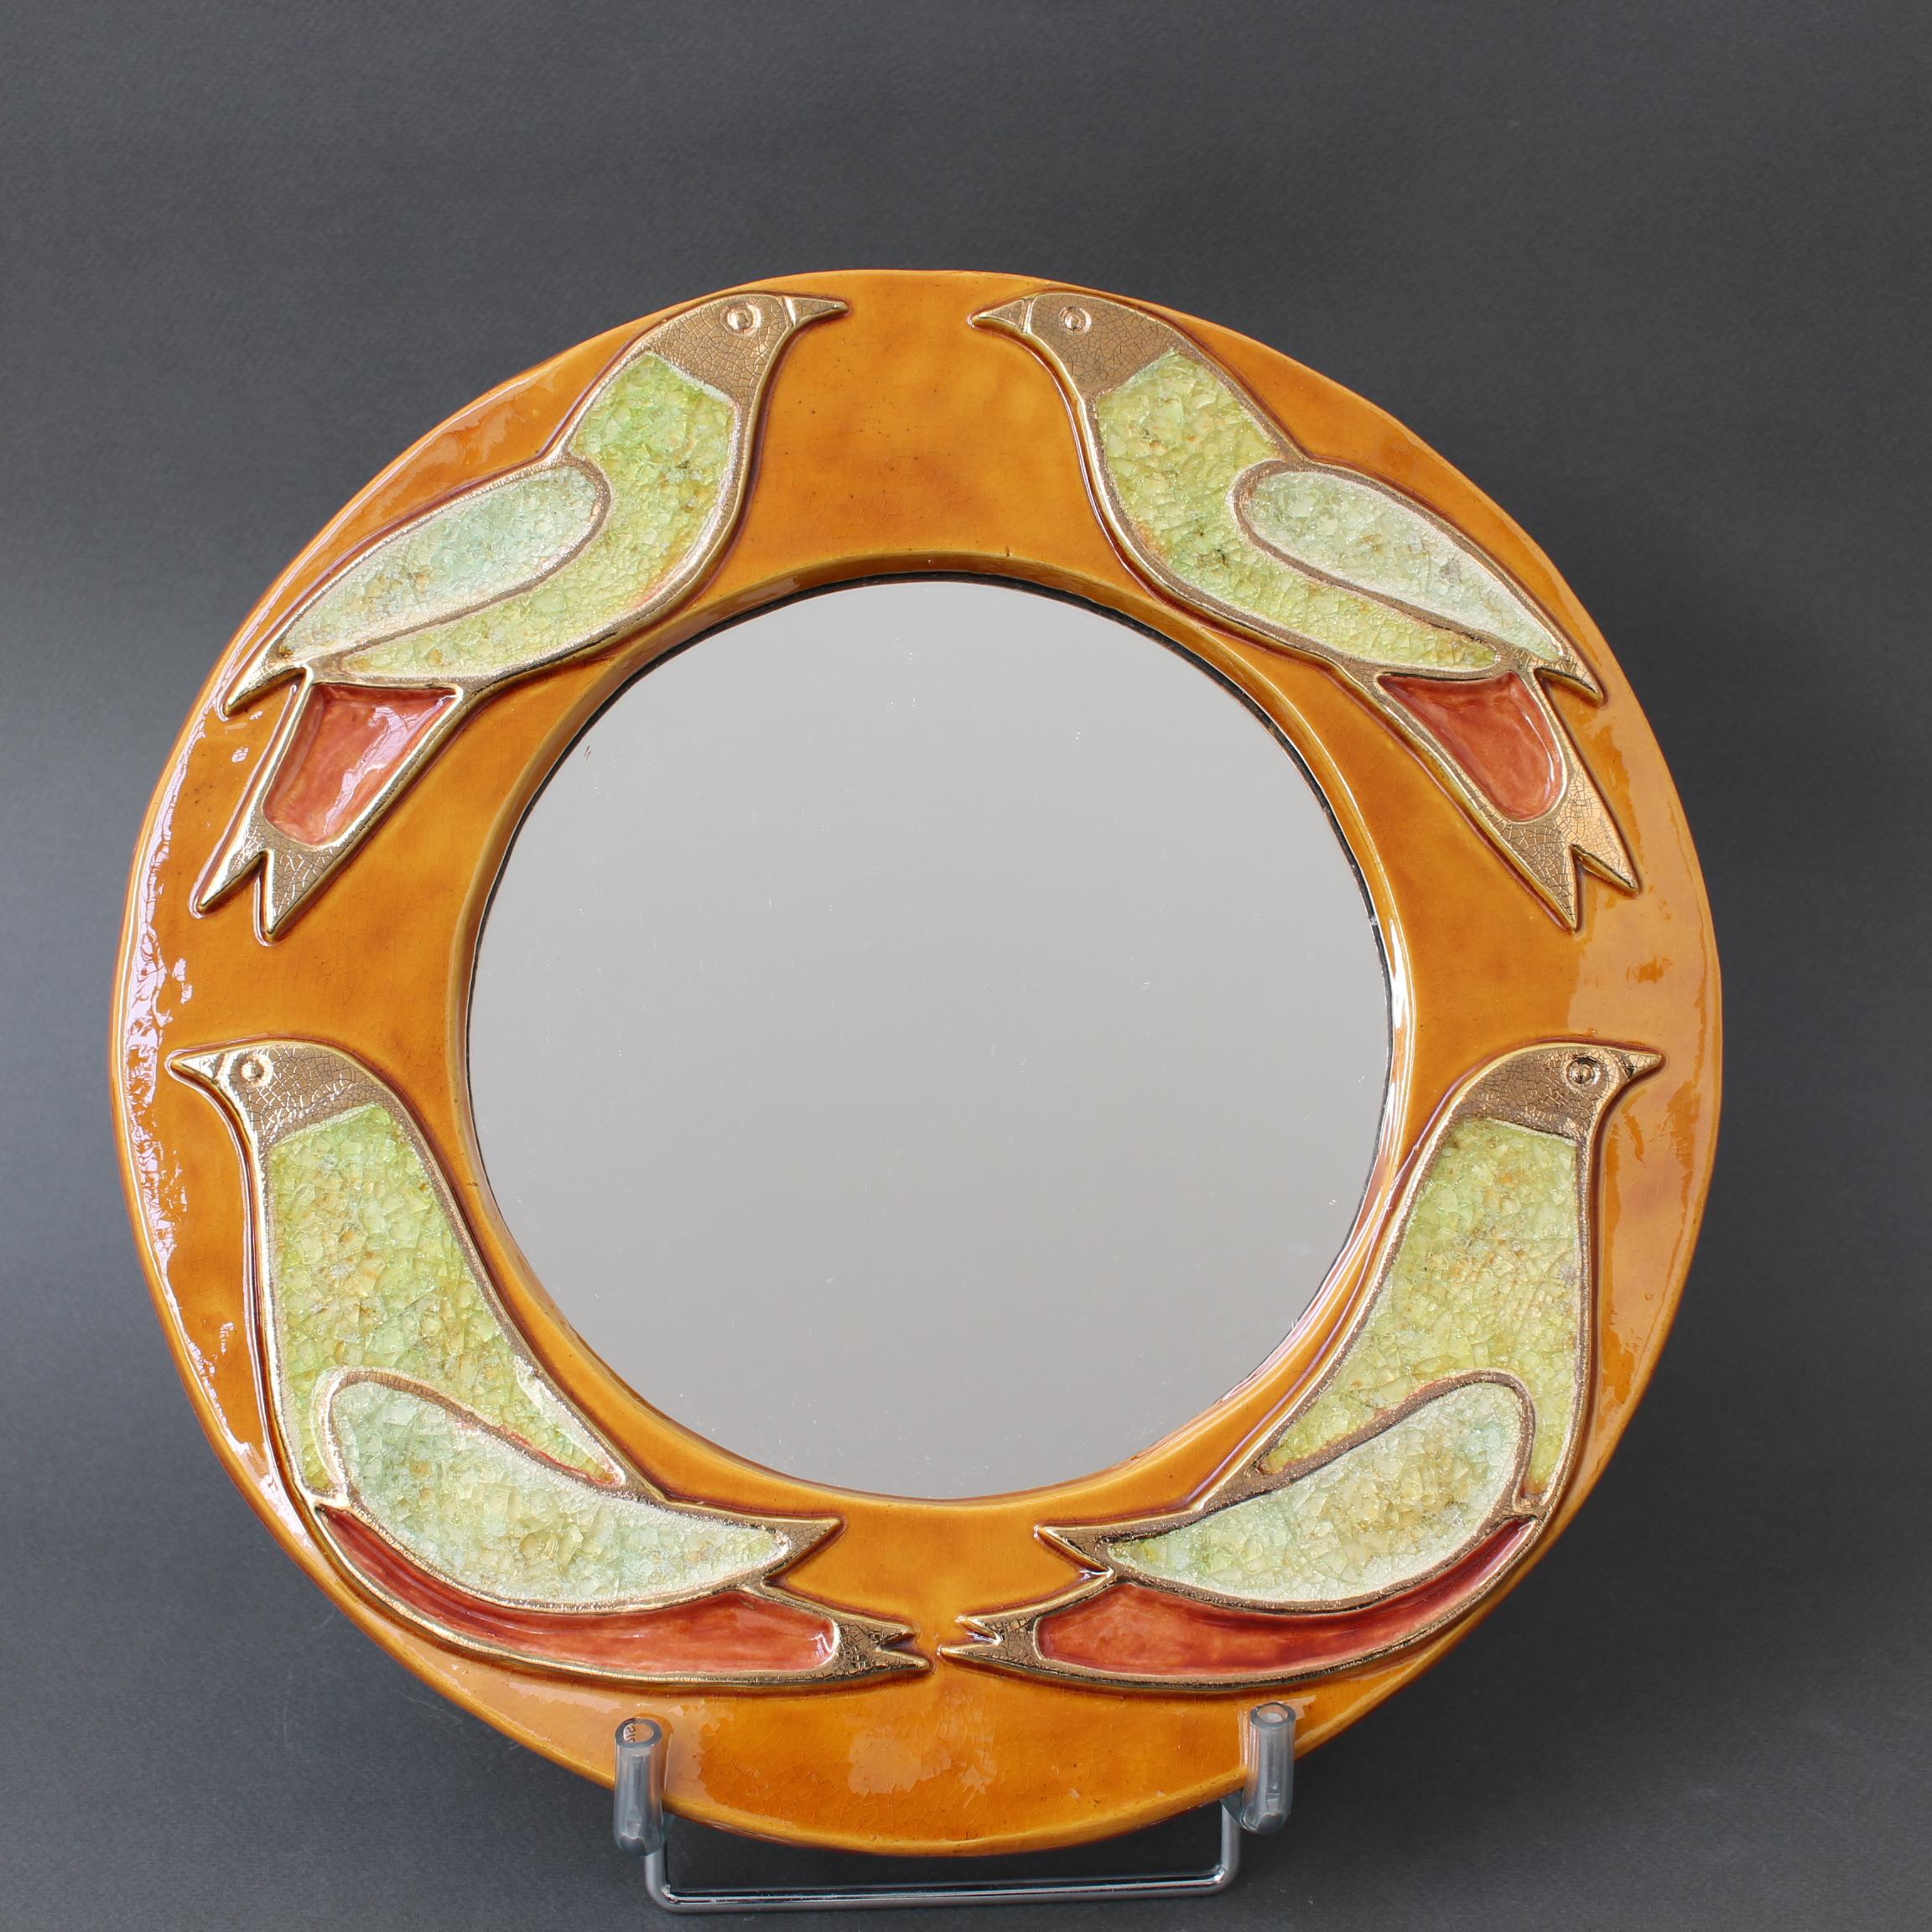 Vintage French ceramic wall mirror with bird motif (circa 1960s), by Mithé Espelt. A porthole-shaped decorative wall mirror delights the eye. The stylised birds are outlined in Espelt's trademark gold craquelure yet their interior gives the